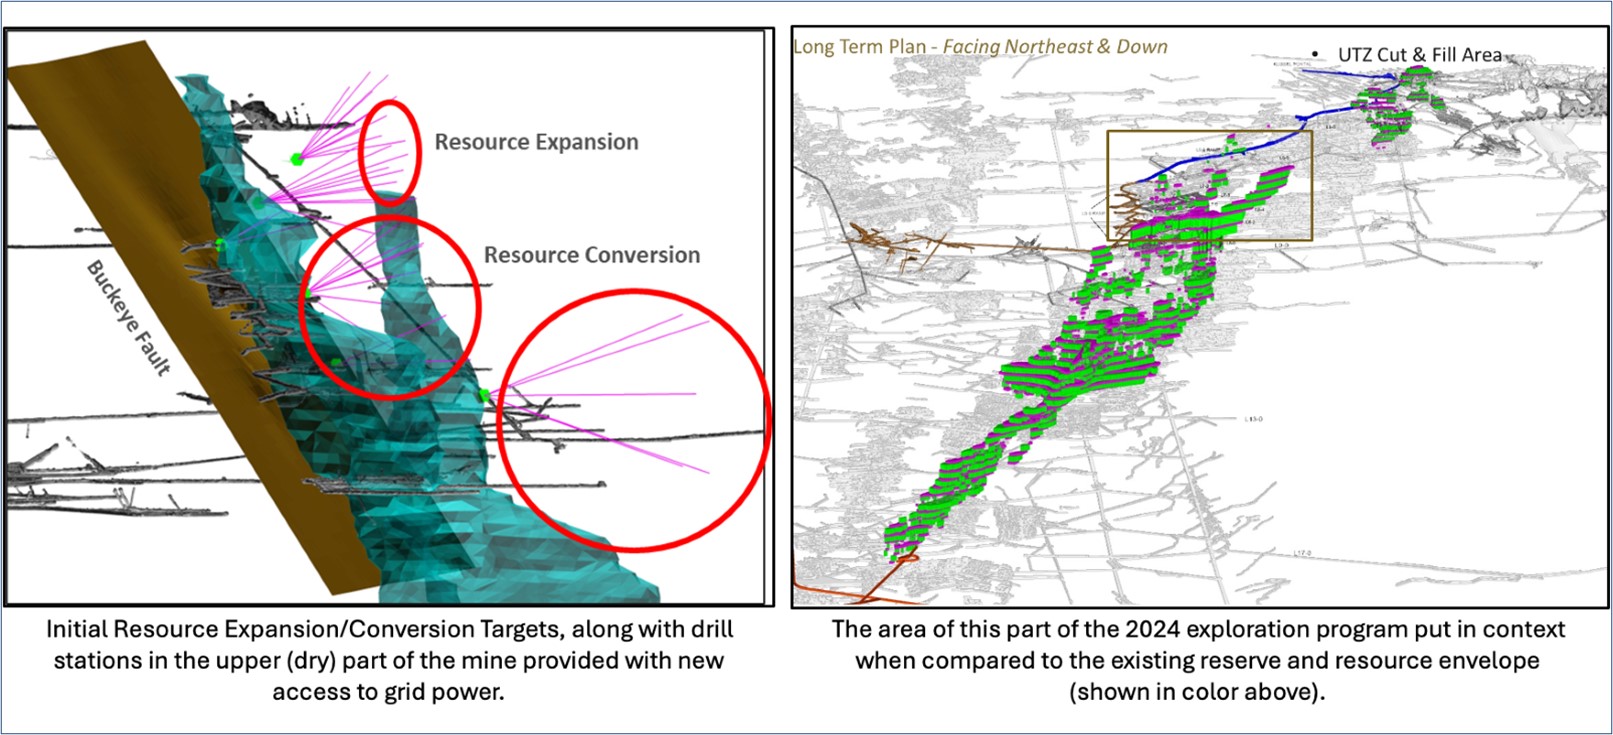 Figure 2: Quill and Newgard Exploration Targets being drilled in the upper part of the mine during 2024